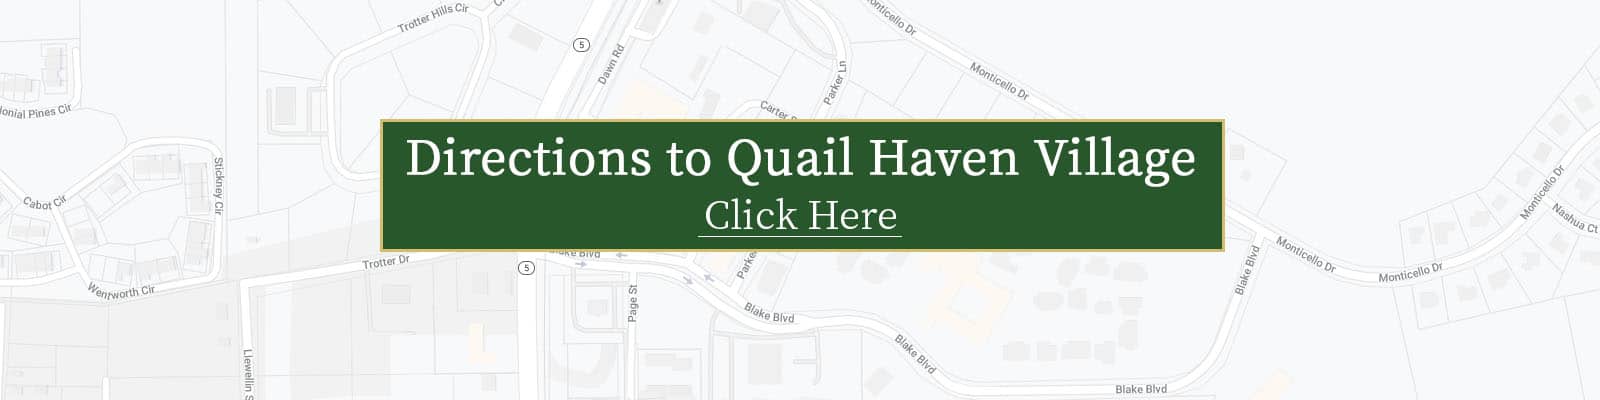 Directions to Quail Haven Village in Pinehurst NC